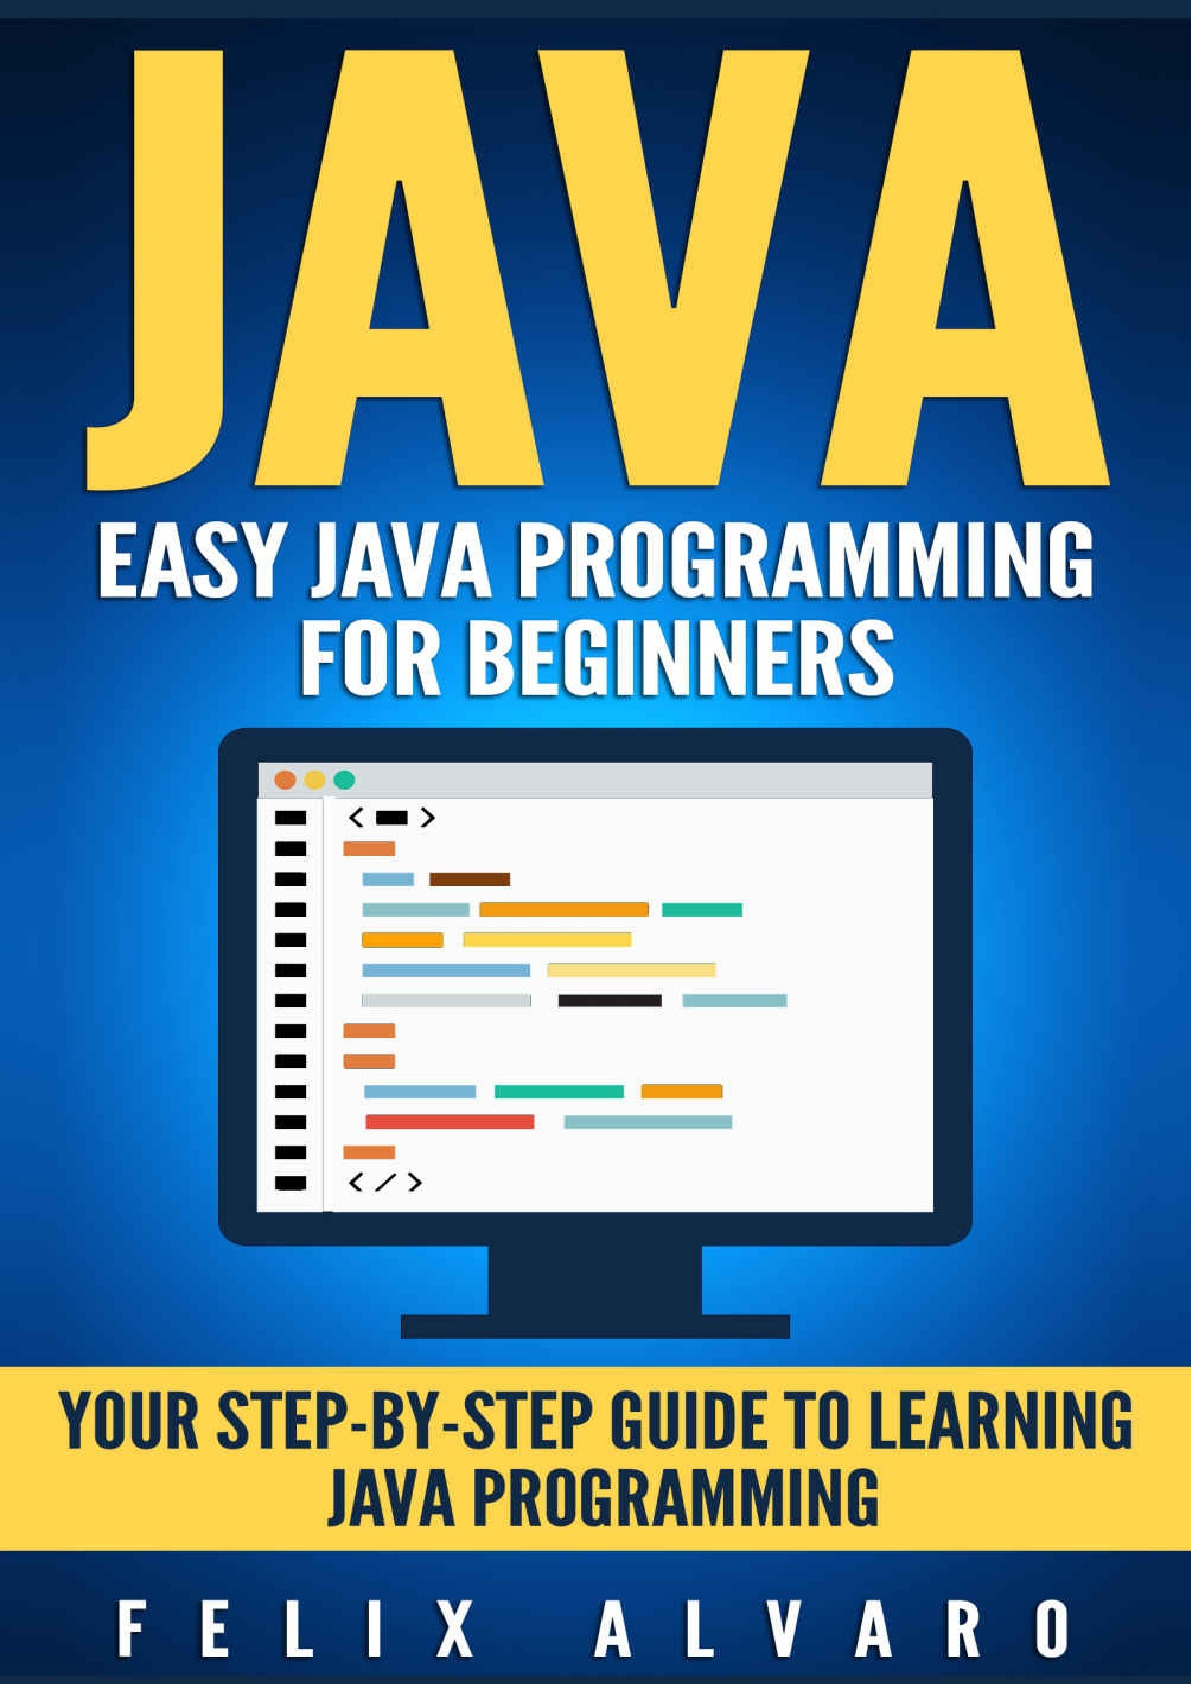 JAVA_ Easy Java Programming for Beginners, Your Step-By-Step Guide to Learning Java Programming